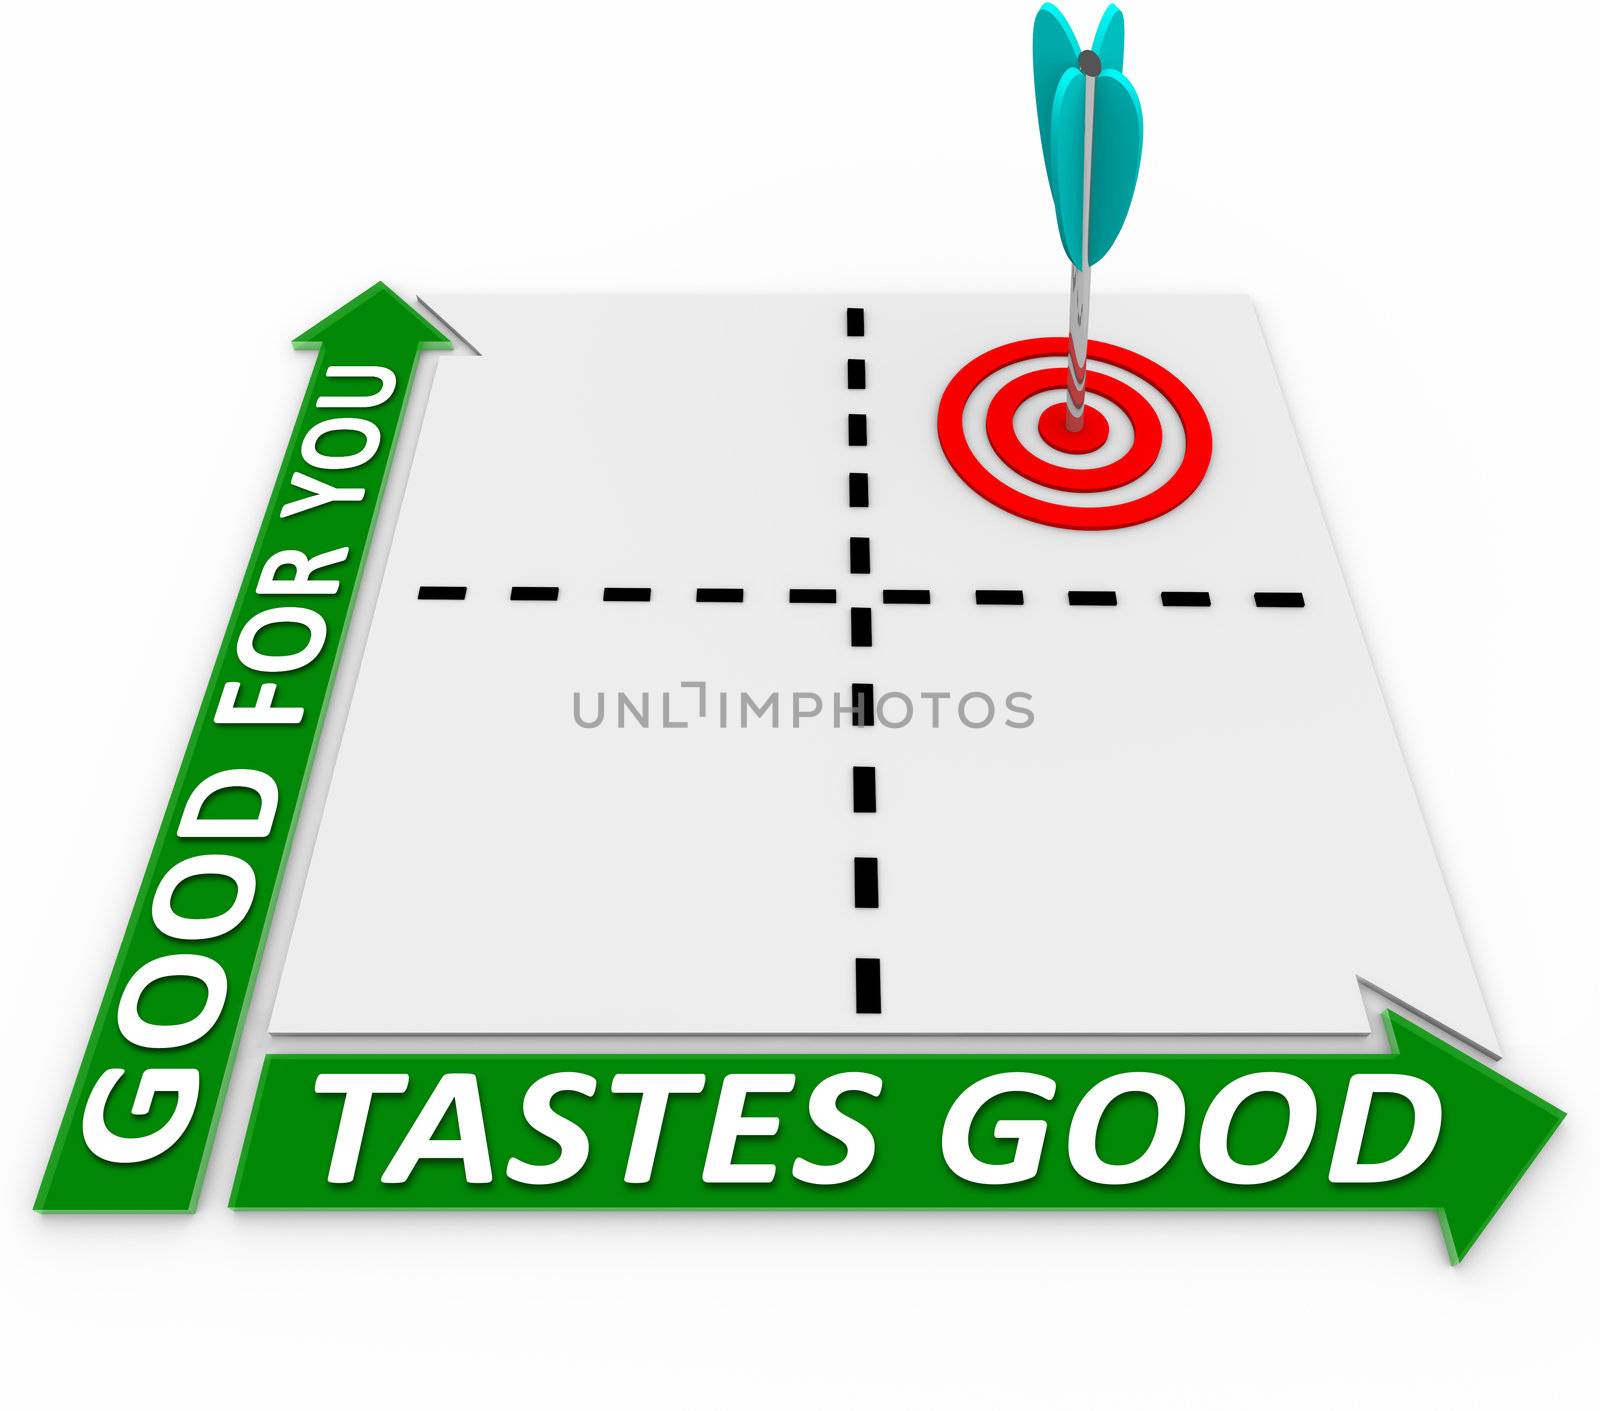 A matrix with four quadrants and an arrow in the quadrant that ranks highly in the measurements for Good for You and Tastes Good